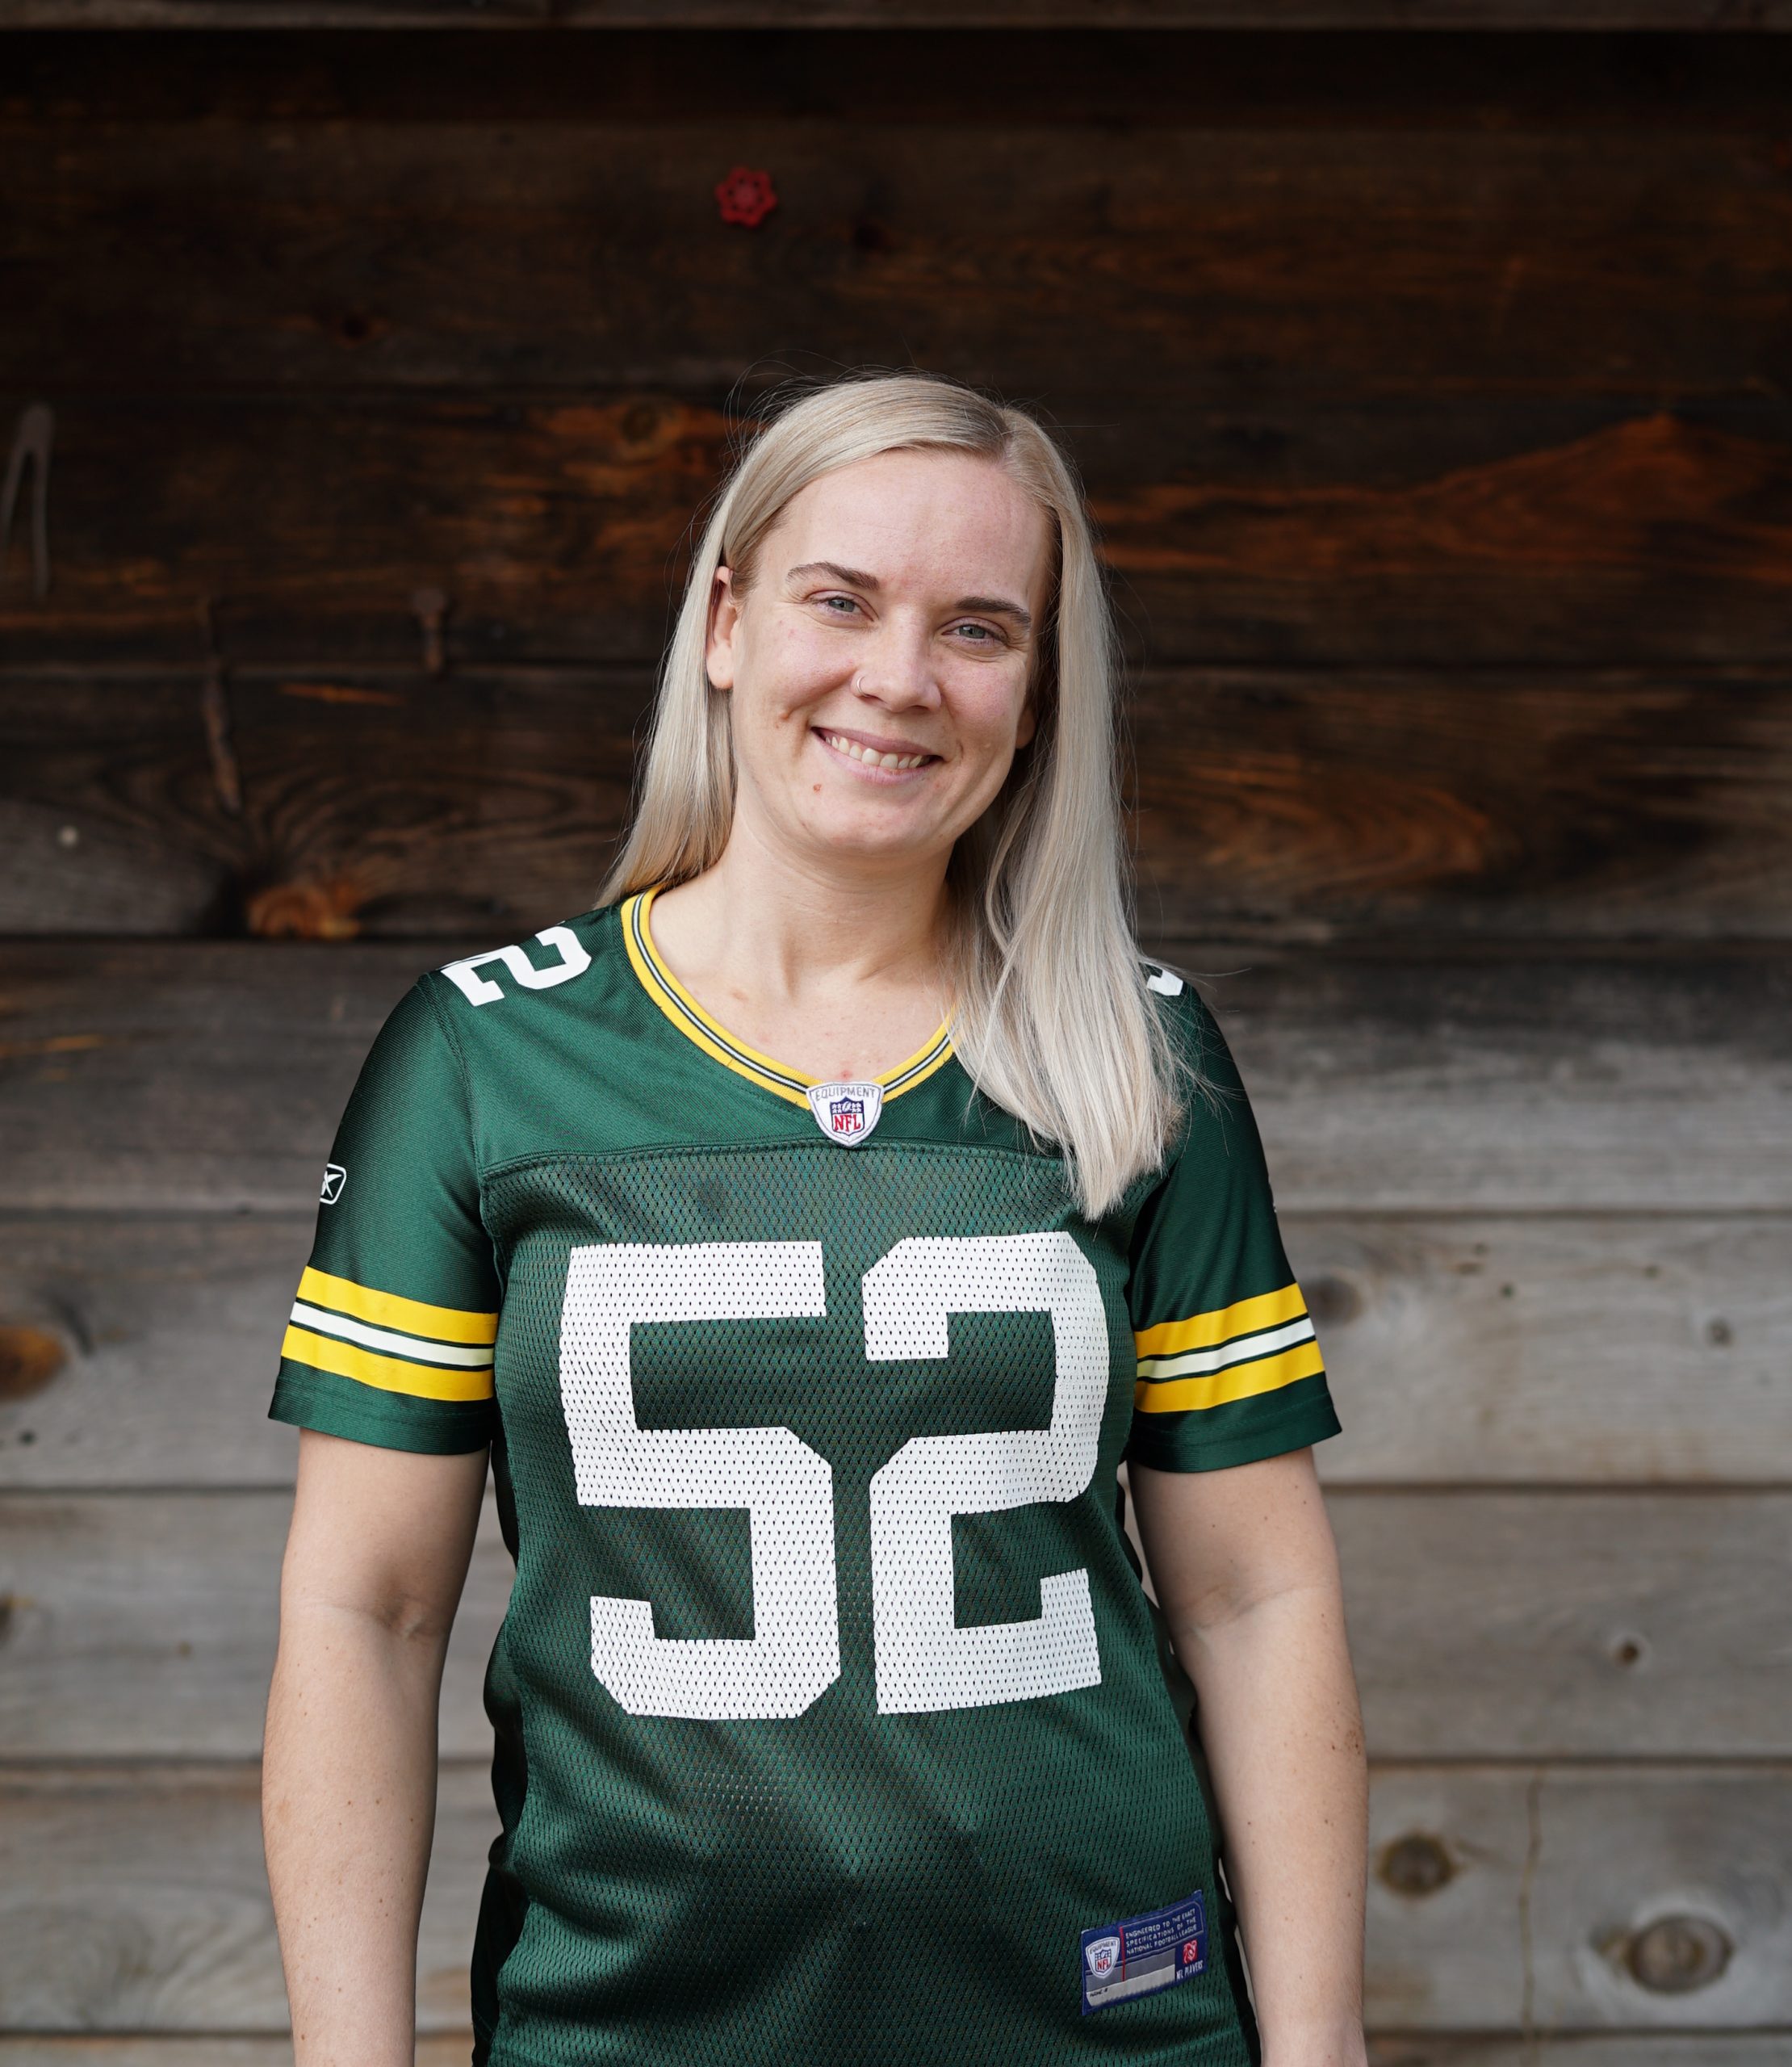 Dr. Katie Sveinson says around the world female sports fans are woefully underserved when it comes to fanwear. (Photo by Ryan Dejaegher)